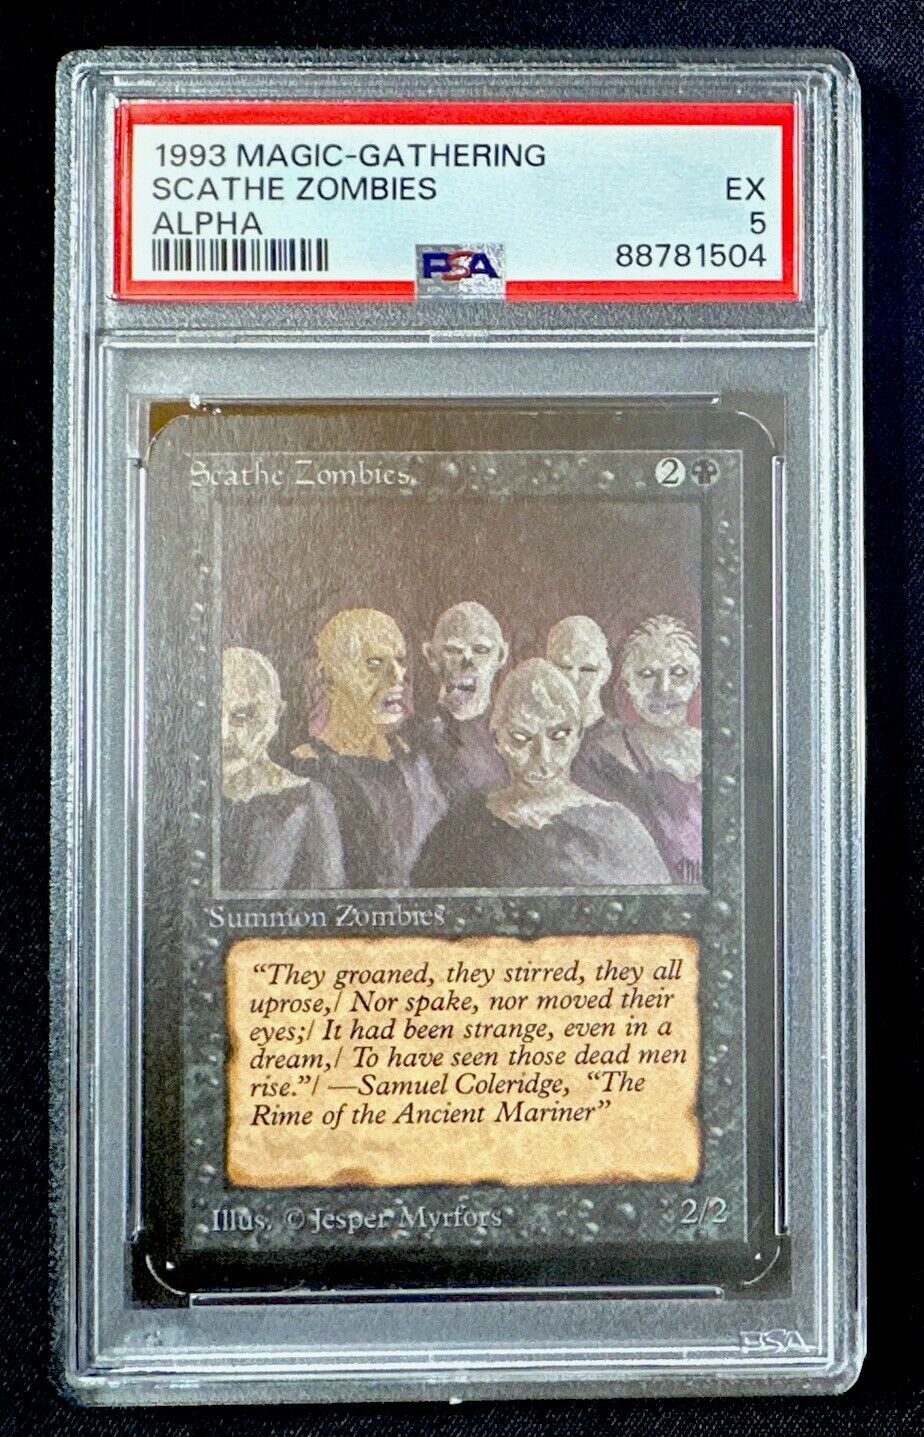 PSA 5 Scathe Zombies Alpha Limited 1993 Magic The Gathering MTG EX Excellent